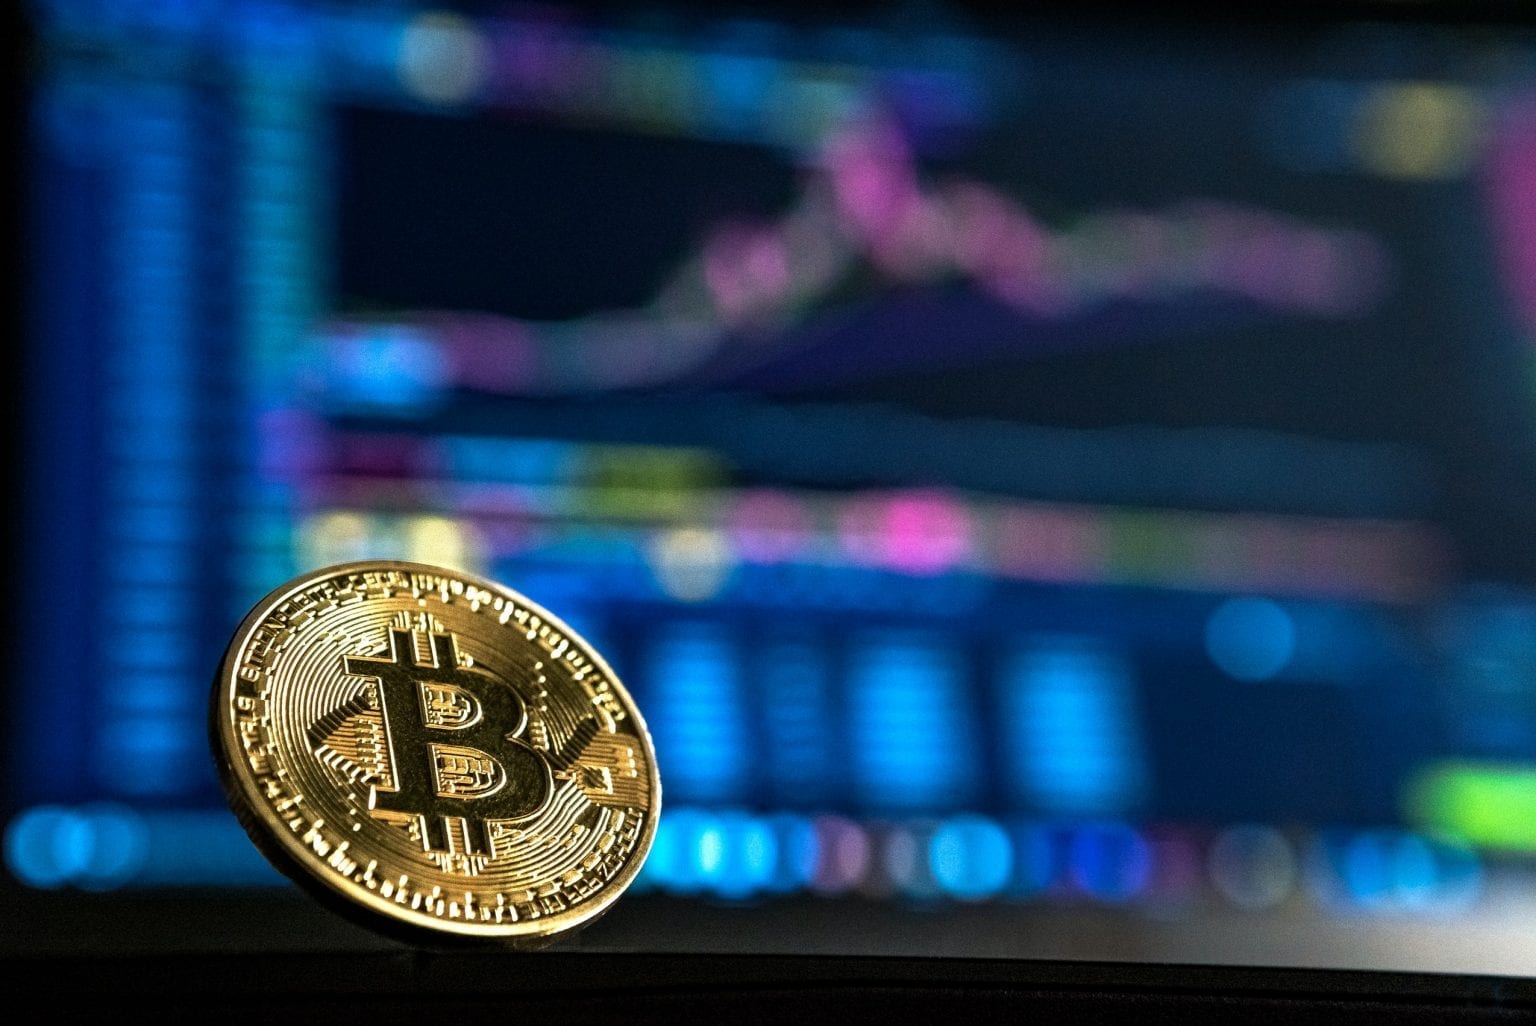 3 interesting facts about the bitcoin